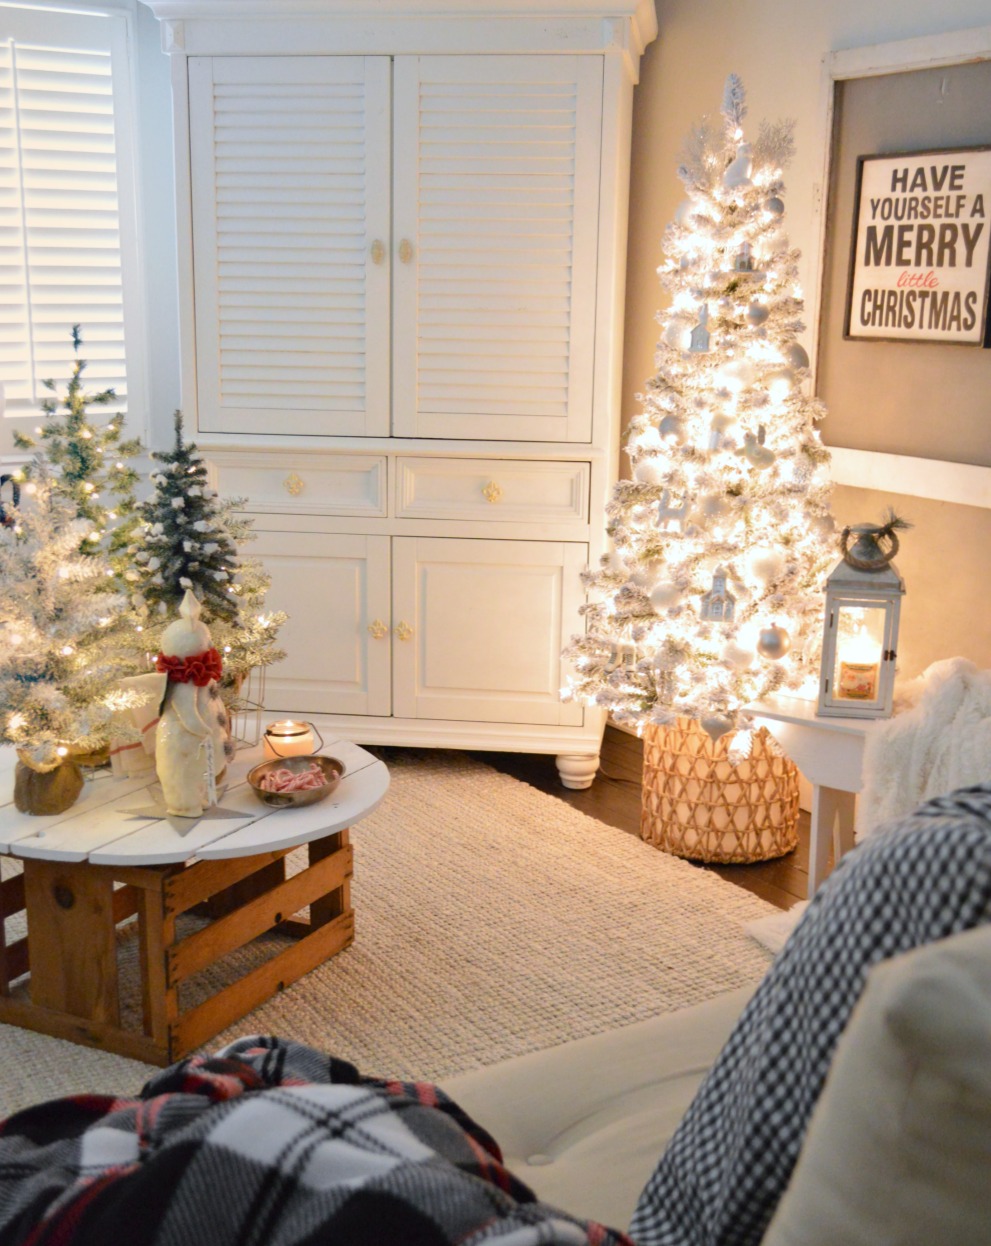 Have Yourself A Merry Little Christmas. Fox Hollow Cottage Holiday, vintage screen, flocked all white Xmas tree